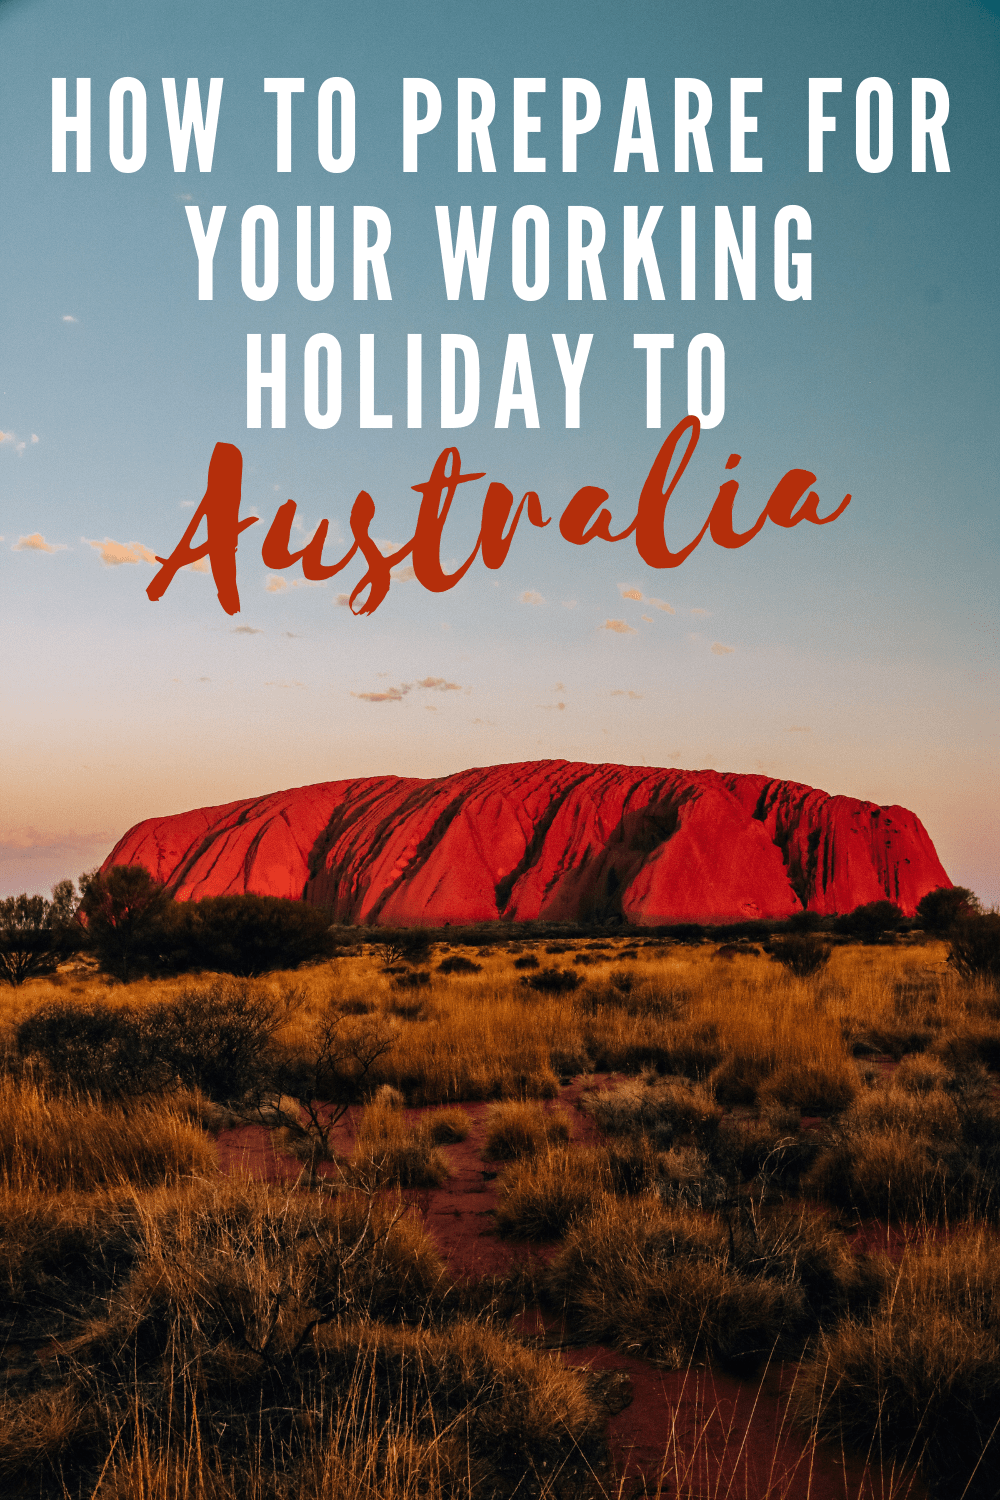 My Australia Working Holiday Visa experience: everything you need to know about the application, proof of funds, what to do when you arrive, finding a working holiday job, opening a bank account, renting, tax and more | working holiday visa australia